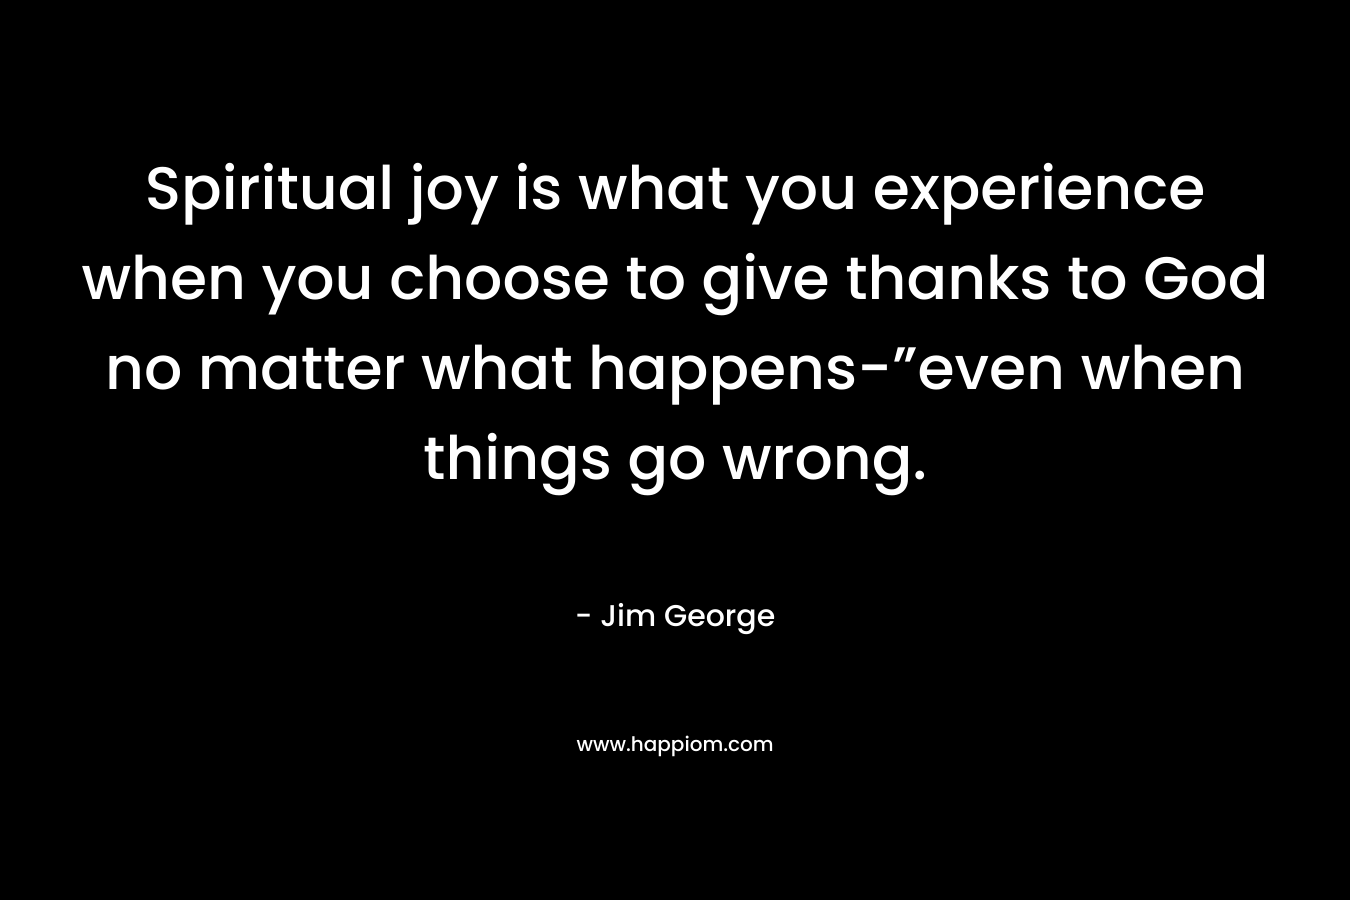 Spiritual joy is what you experience when you choose to give thanks to God no matter what happens-”even when things go wrong.